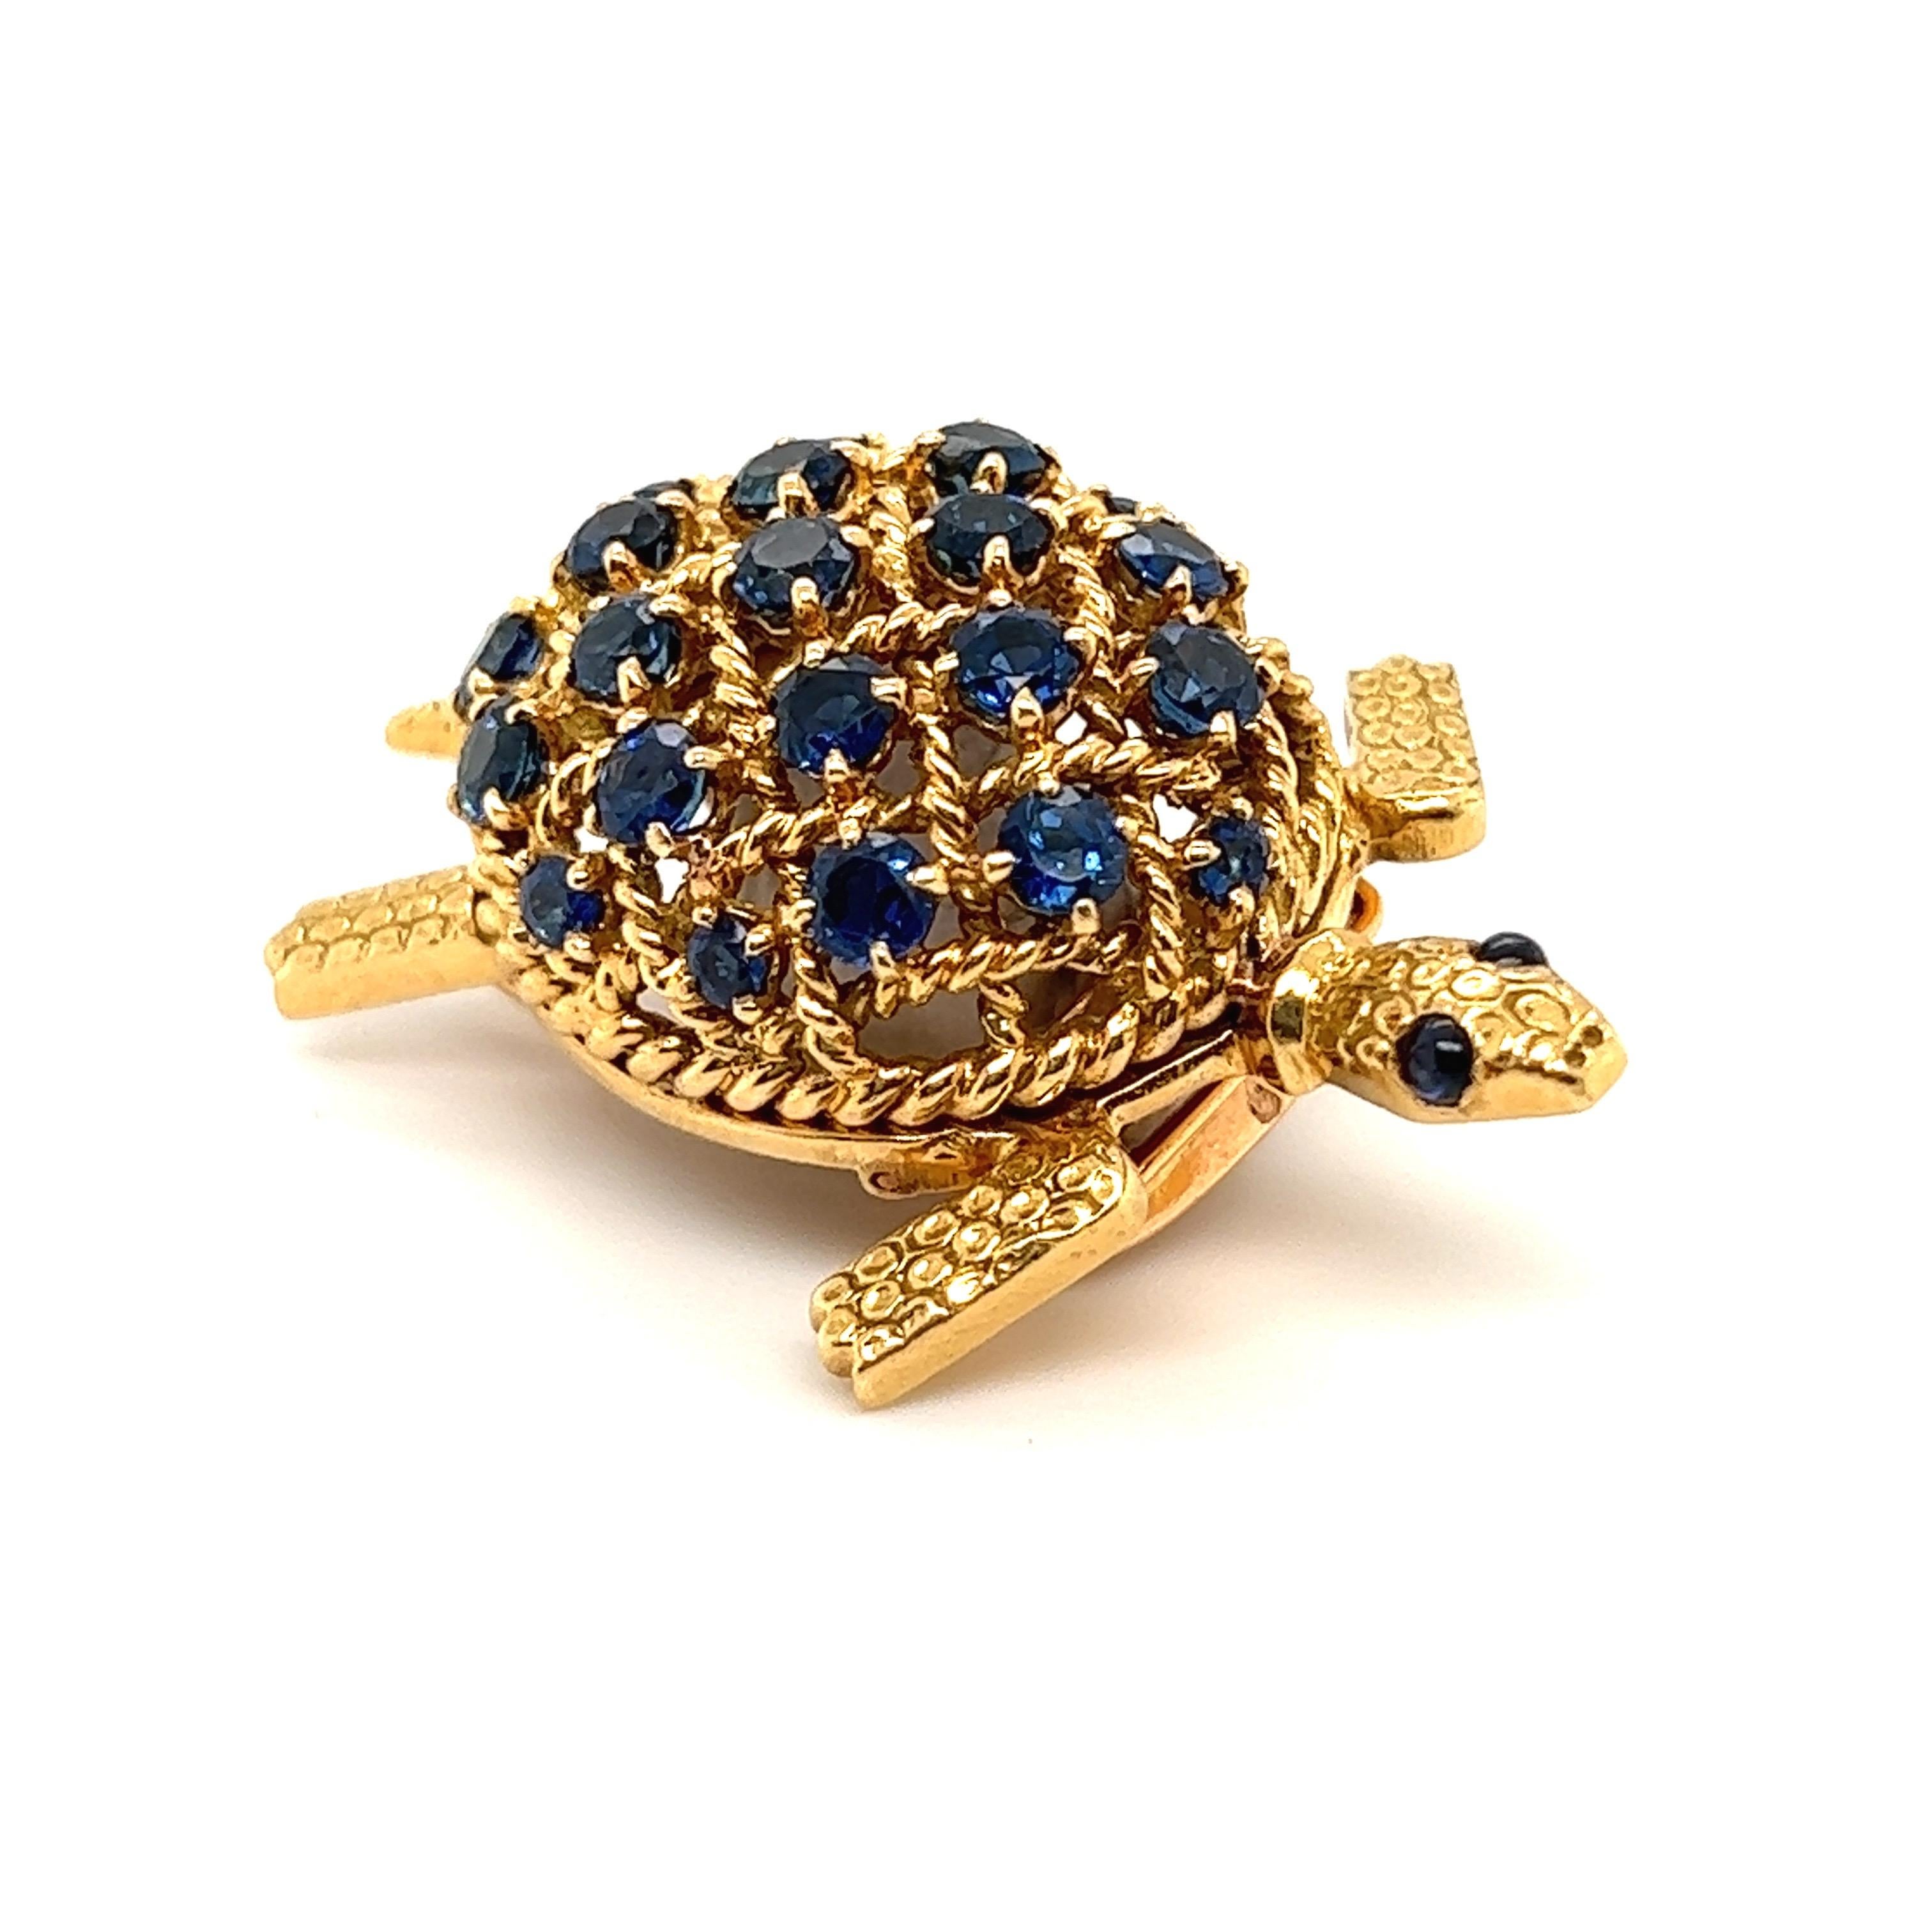 Delightful 18 karat yellow gold and sapphire turtle brooch, by Cartier, circa 1950-1960's.

Whimsical brooch by Cartier, in form of a turtle, the body of finely textured yellow gold, the shell of corded gold wire and decorated with round, faceted